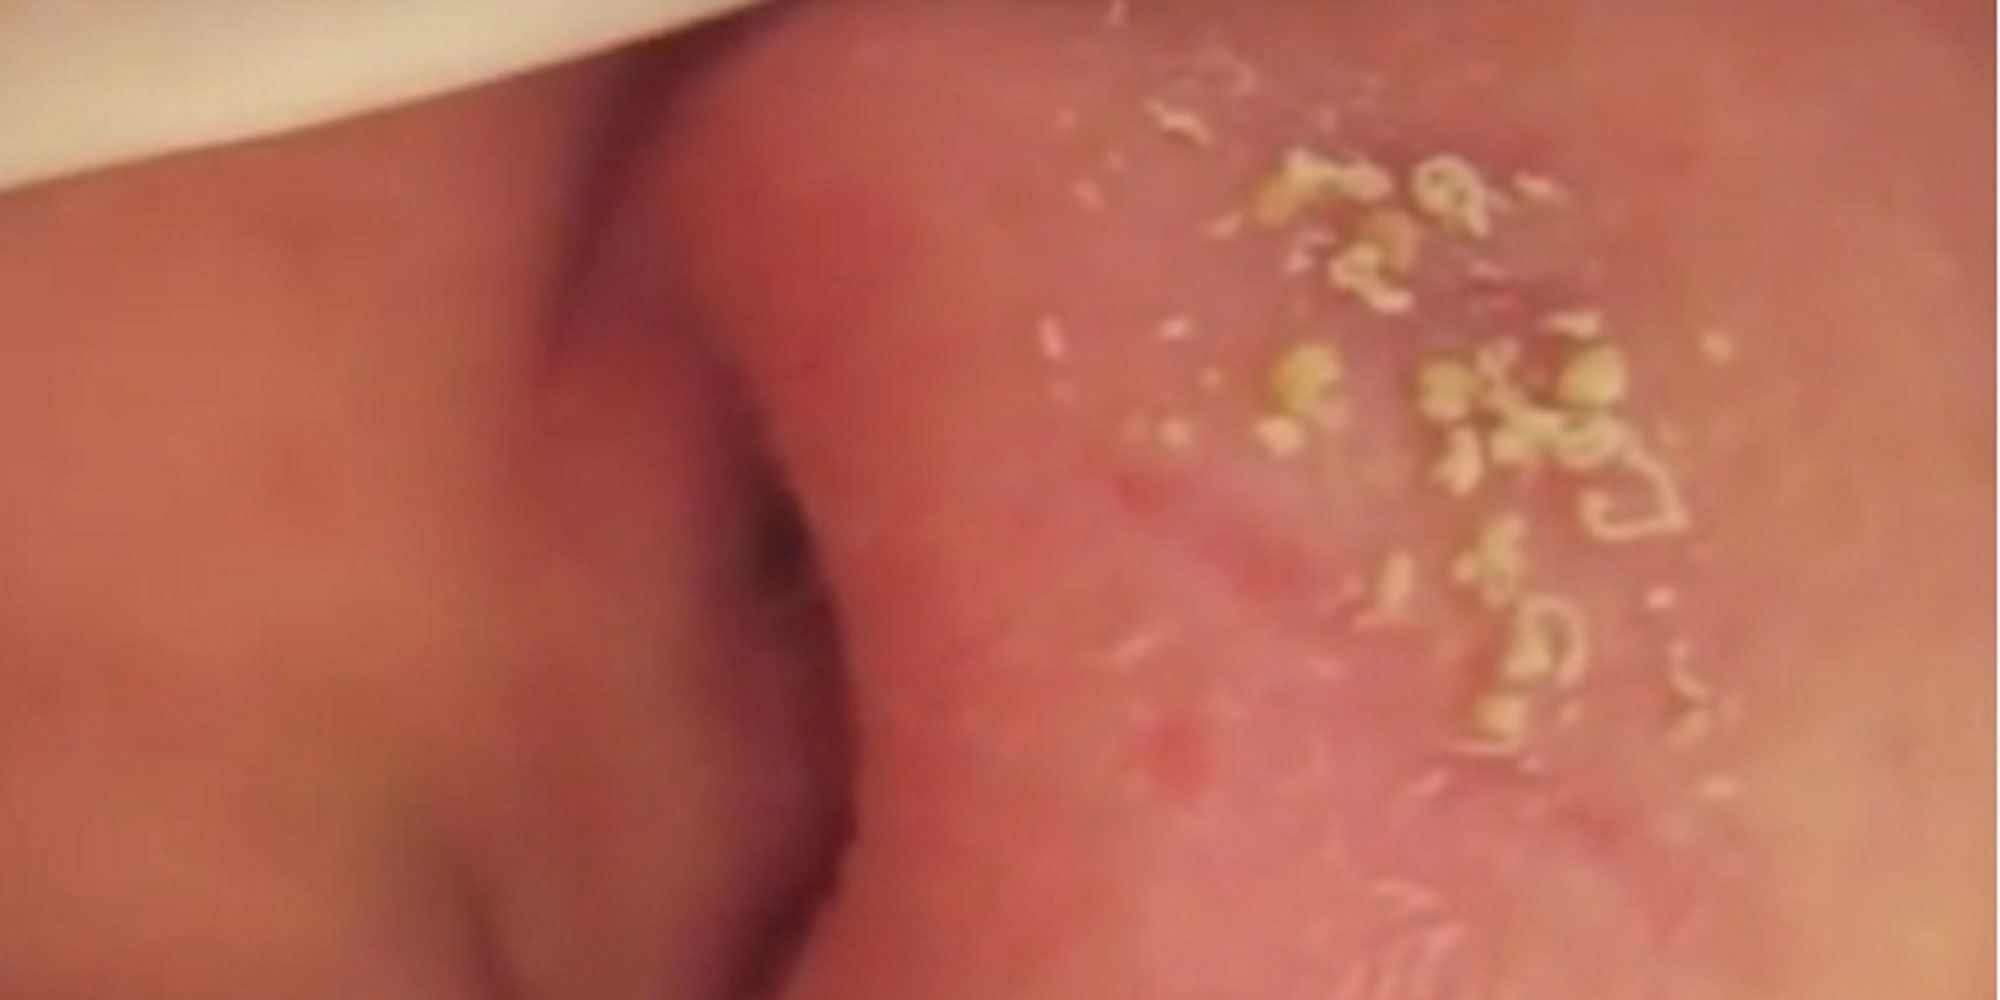 This woman has dozens of blackheads squeezed at the same time